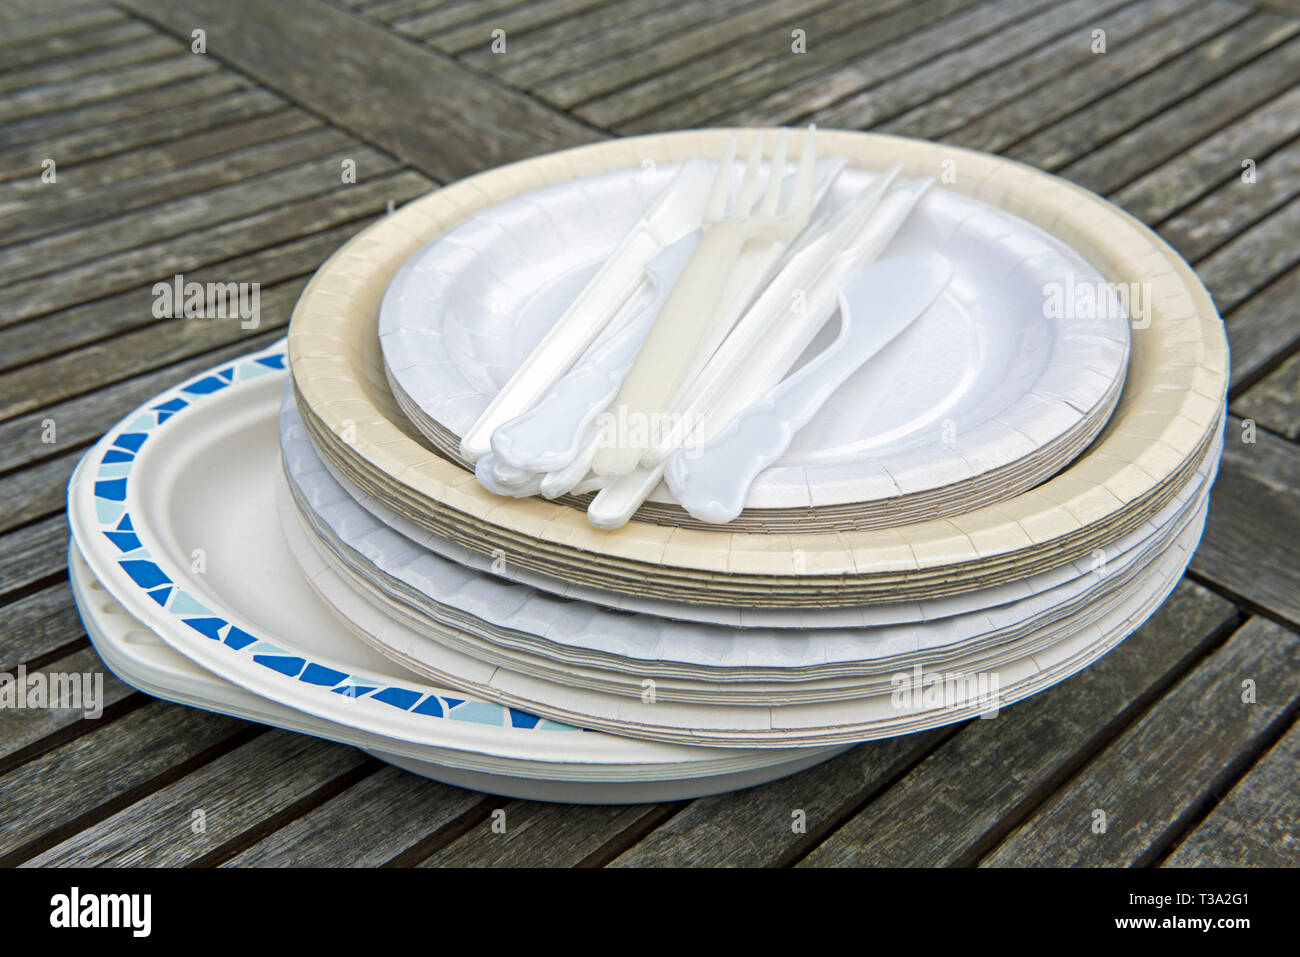 Assorted paper plates with plastic cutlery on garden table. Stock Photo